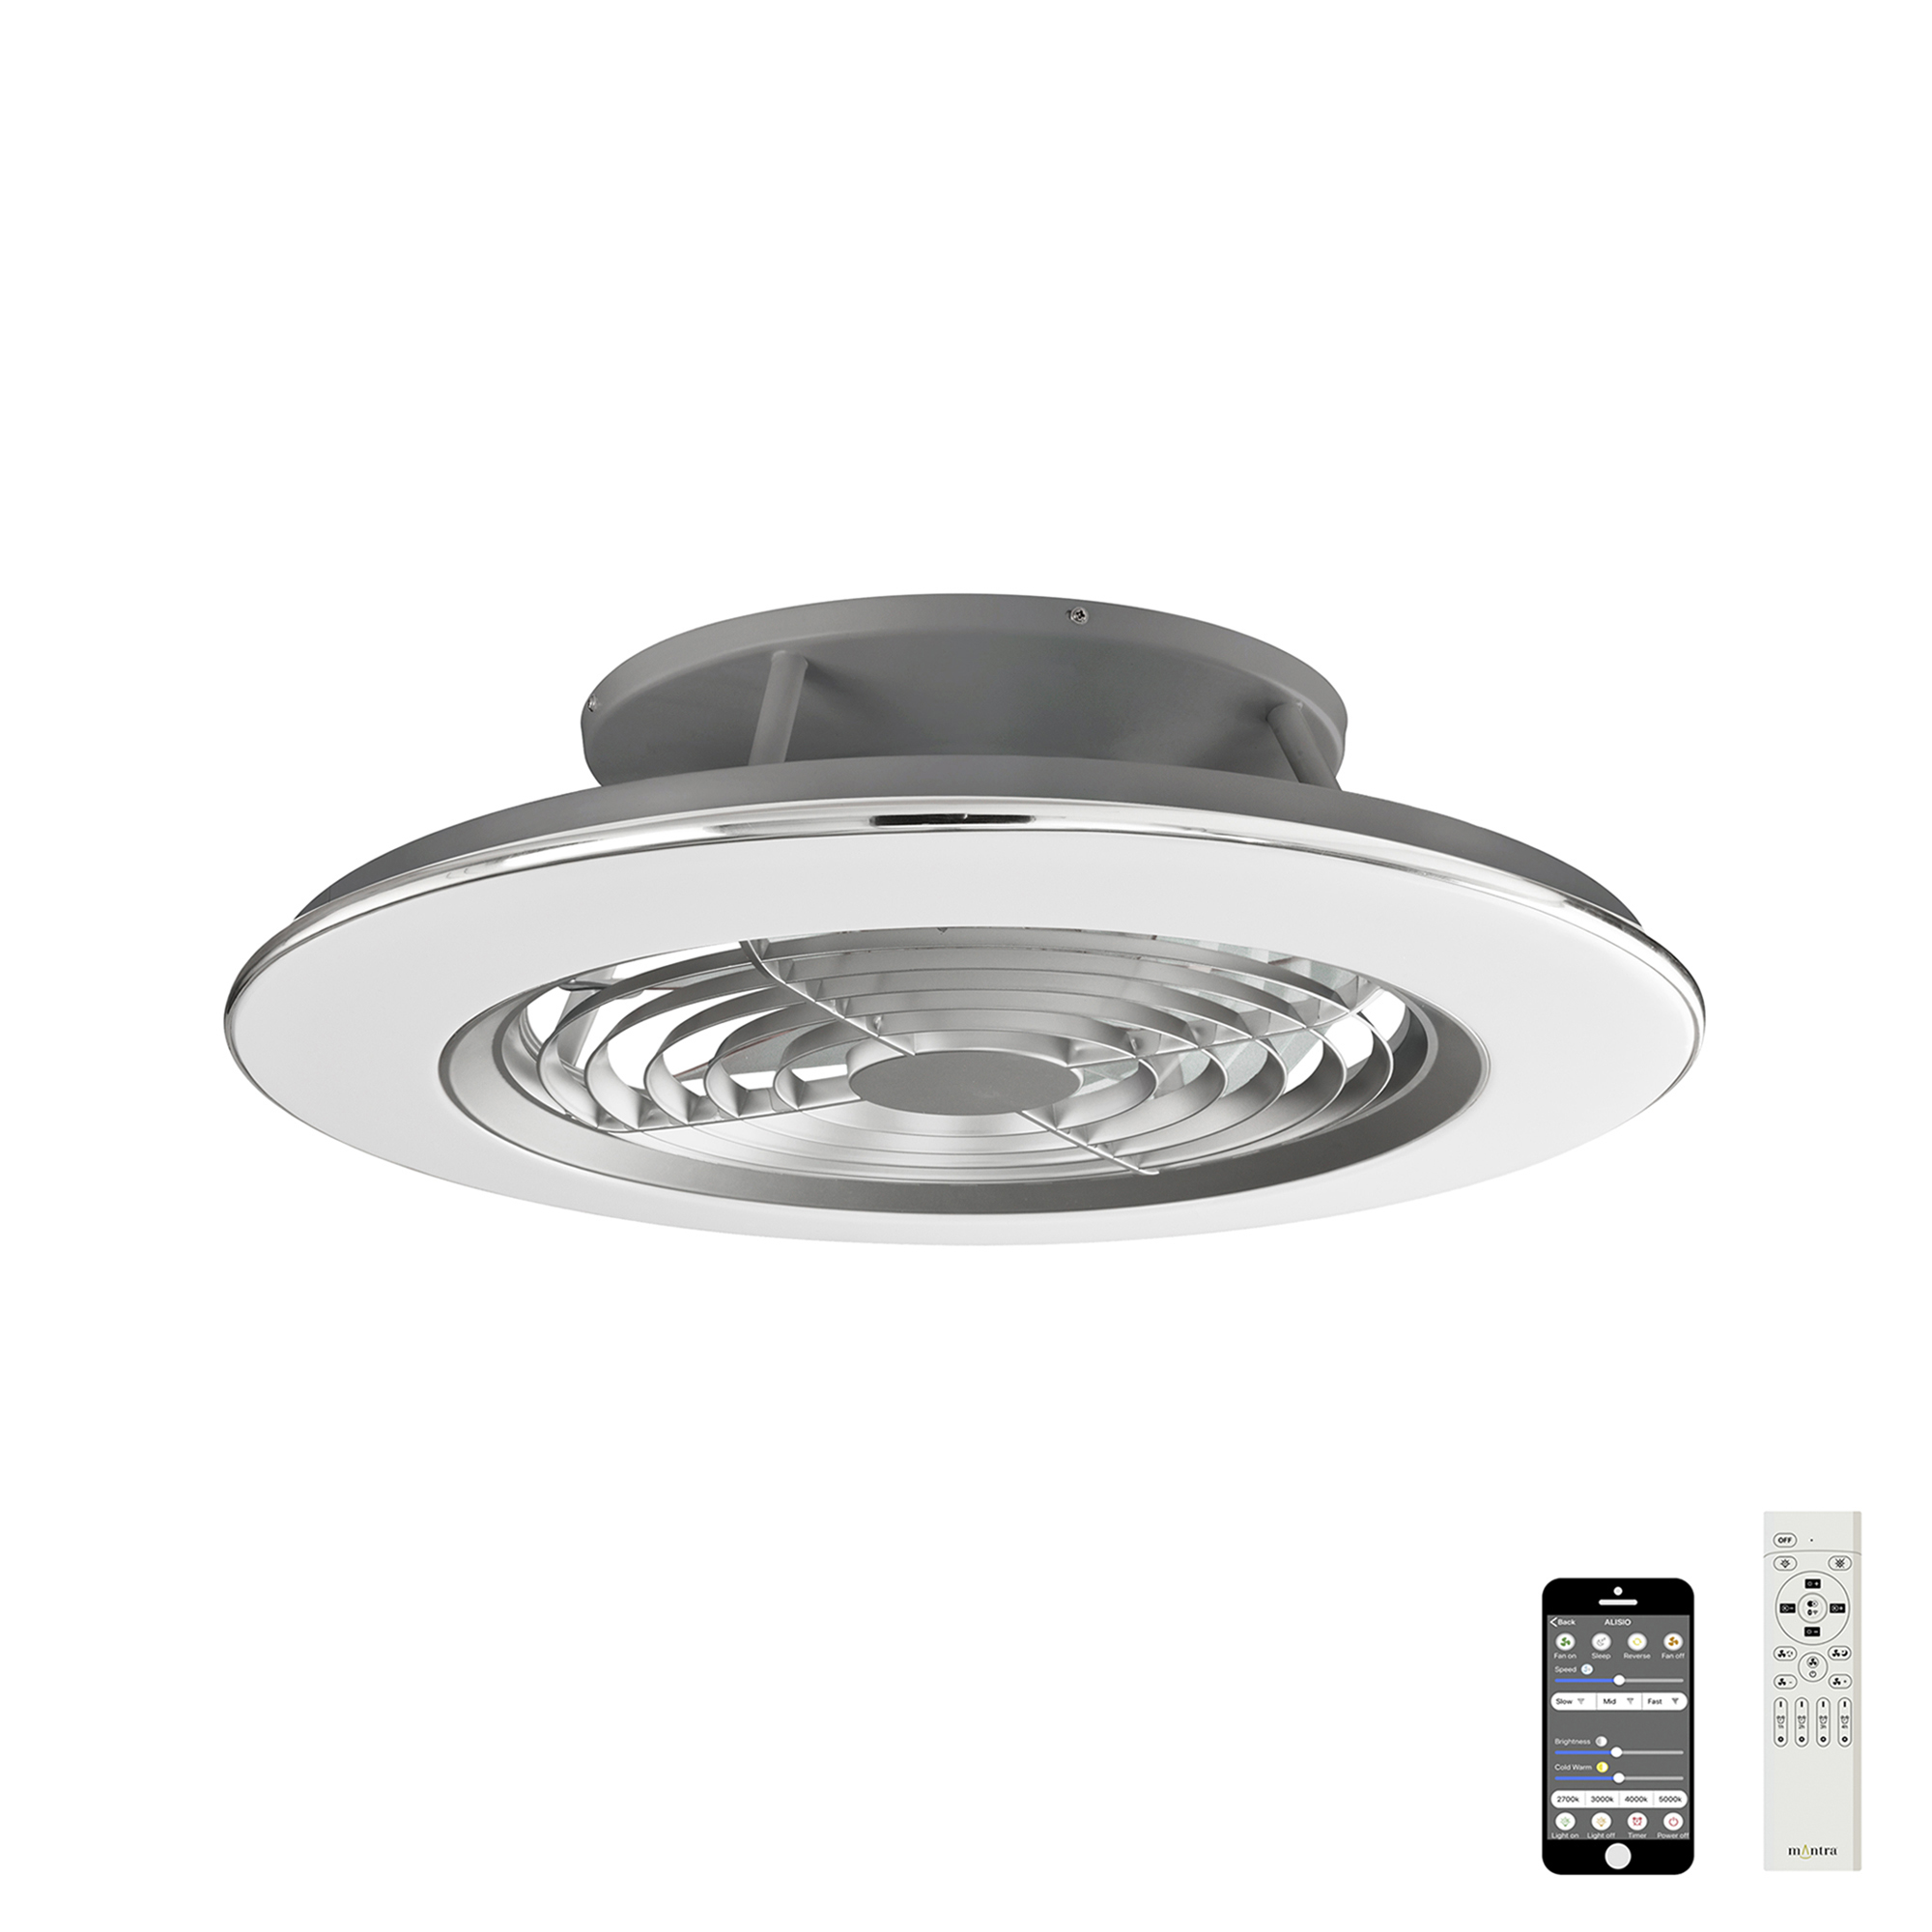 M6706  Alisio 70W LED Dimmable Ceiling Light & Fan; Remote / APP Controlled Polished Chrome